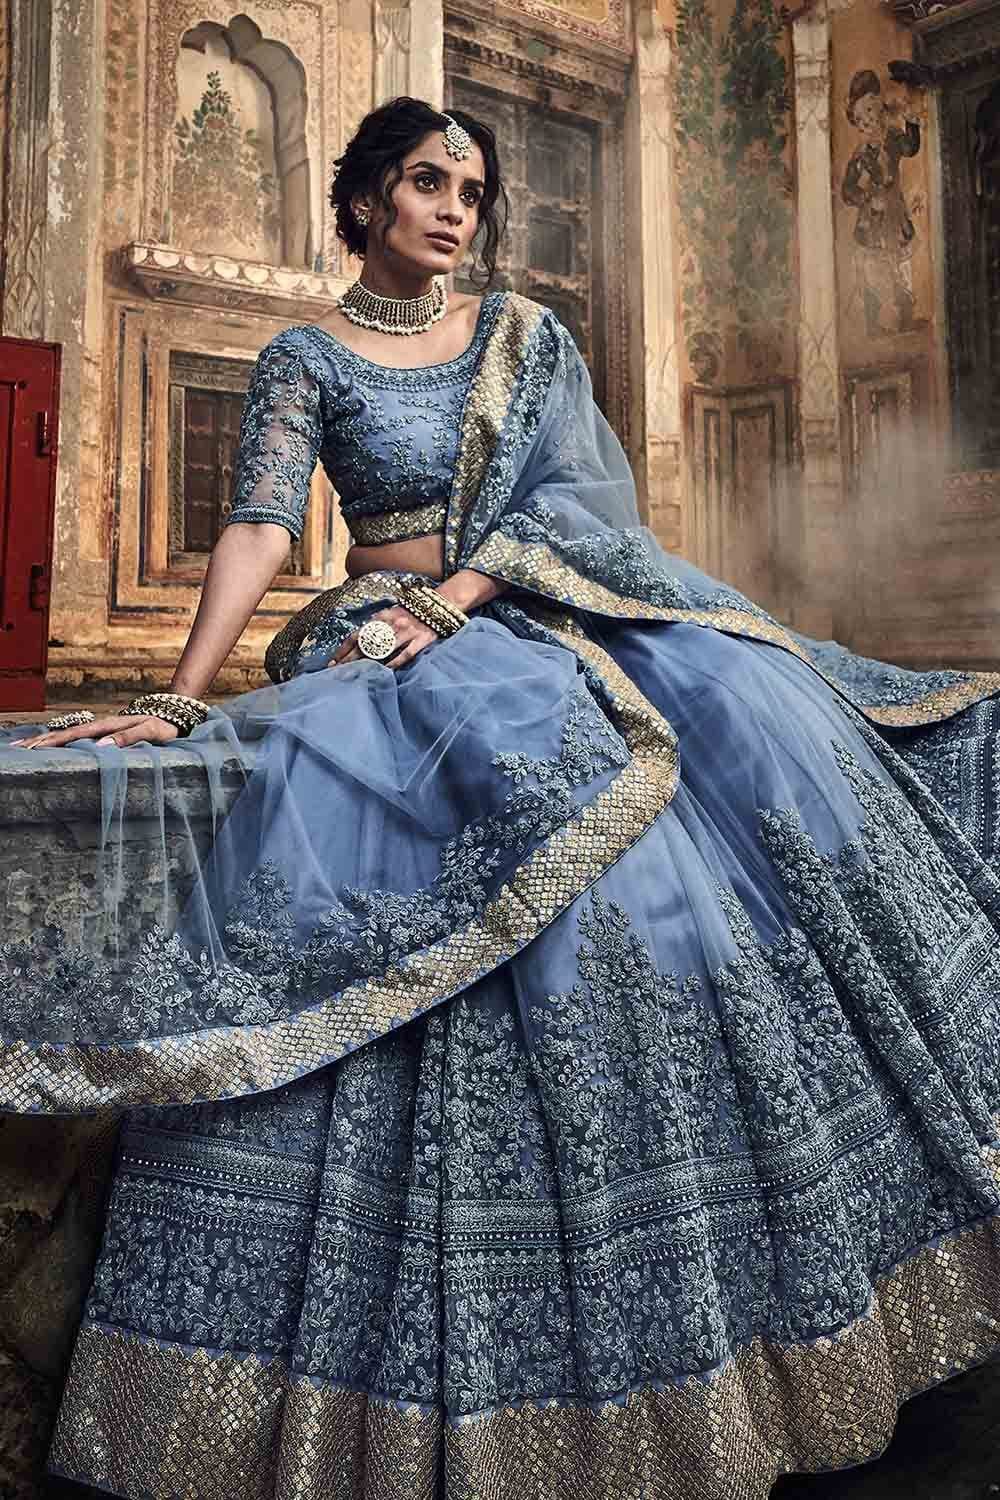 South Indian Lehenga - Buy South Indian Lehenga Online Starting at Just  ₹486 | Meesho